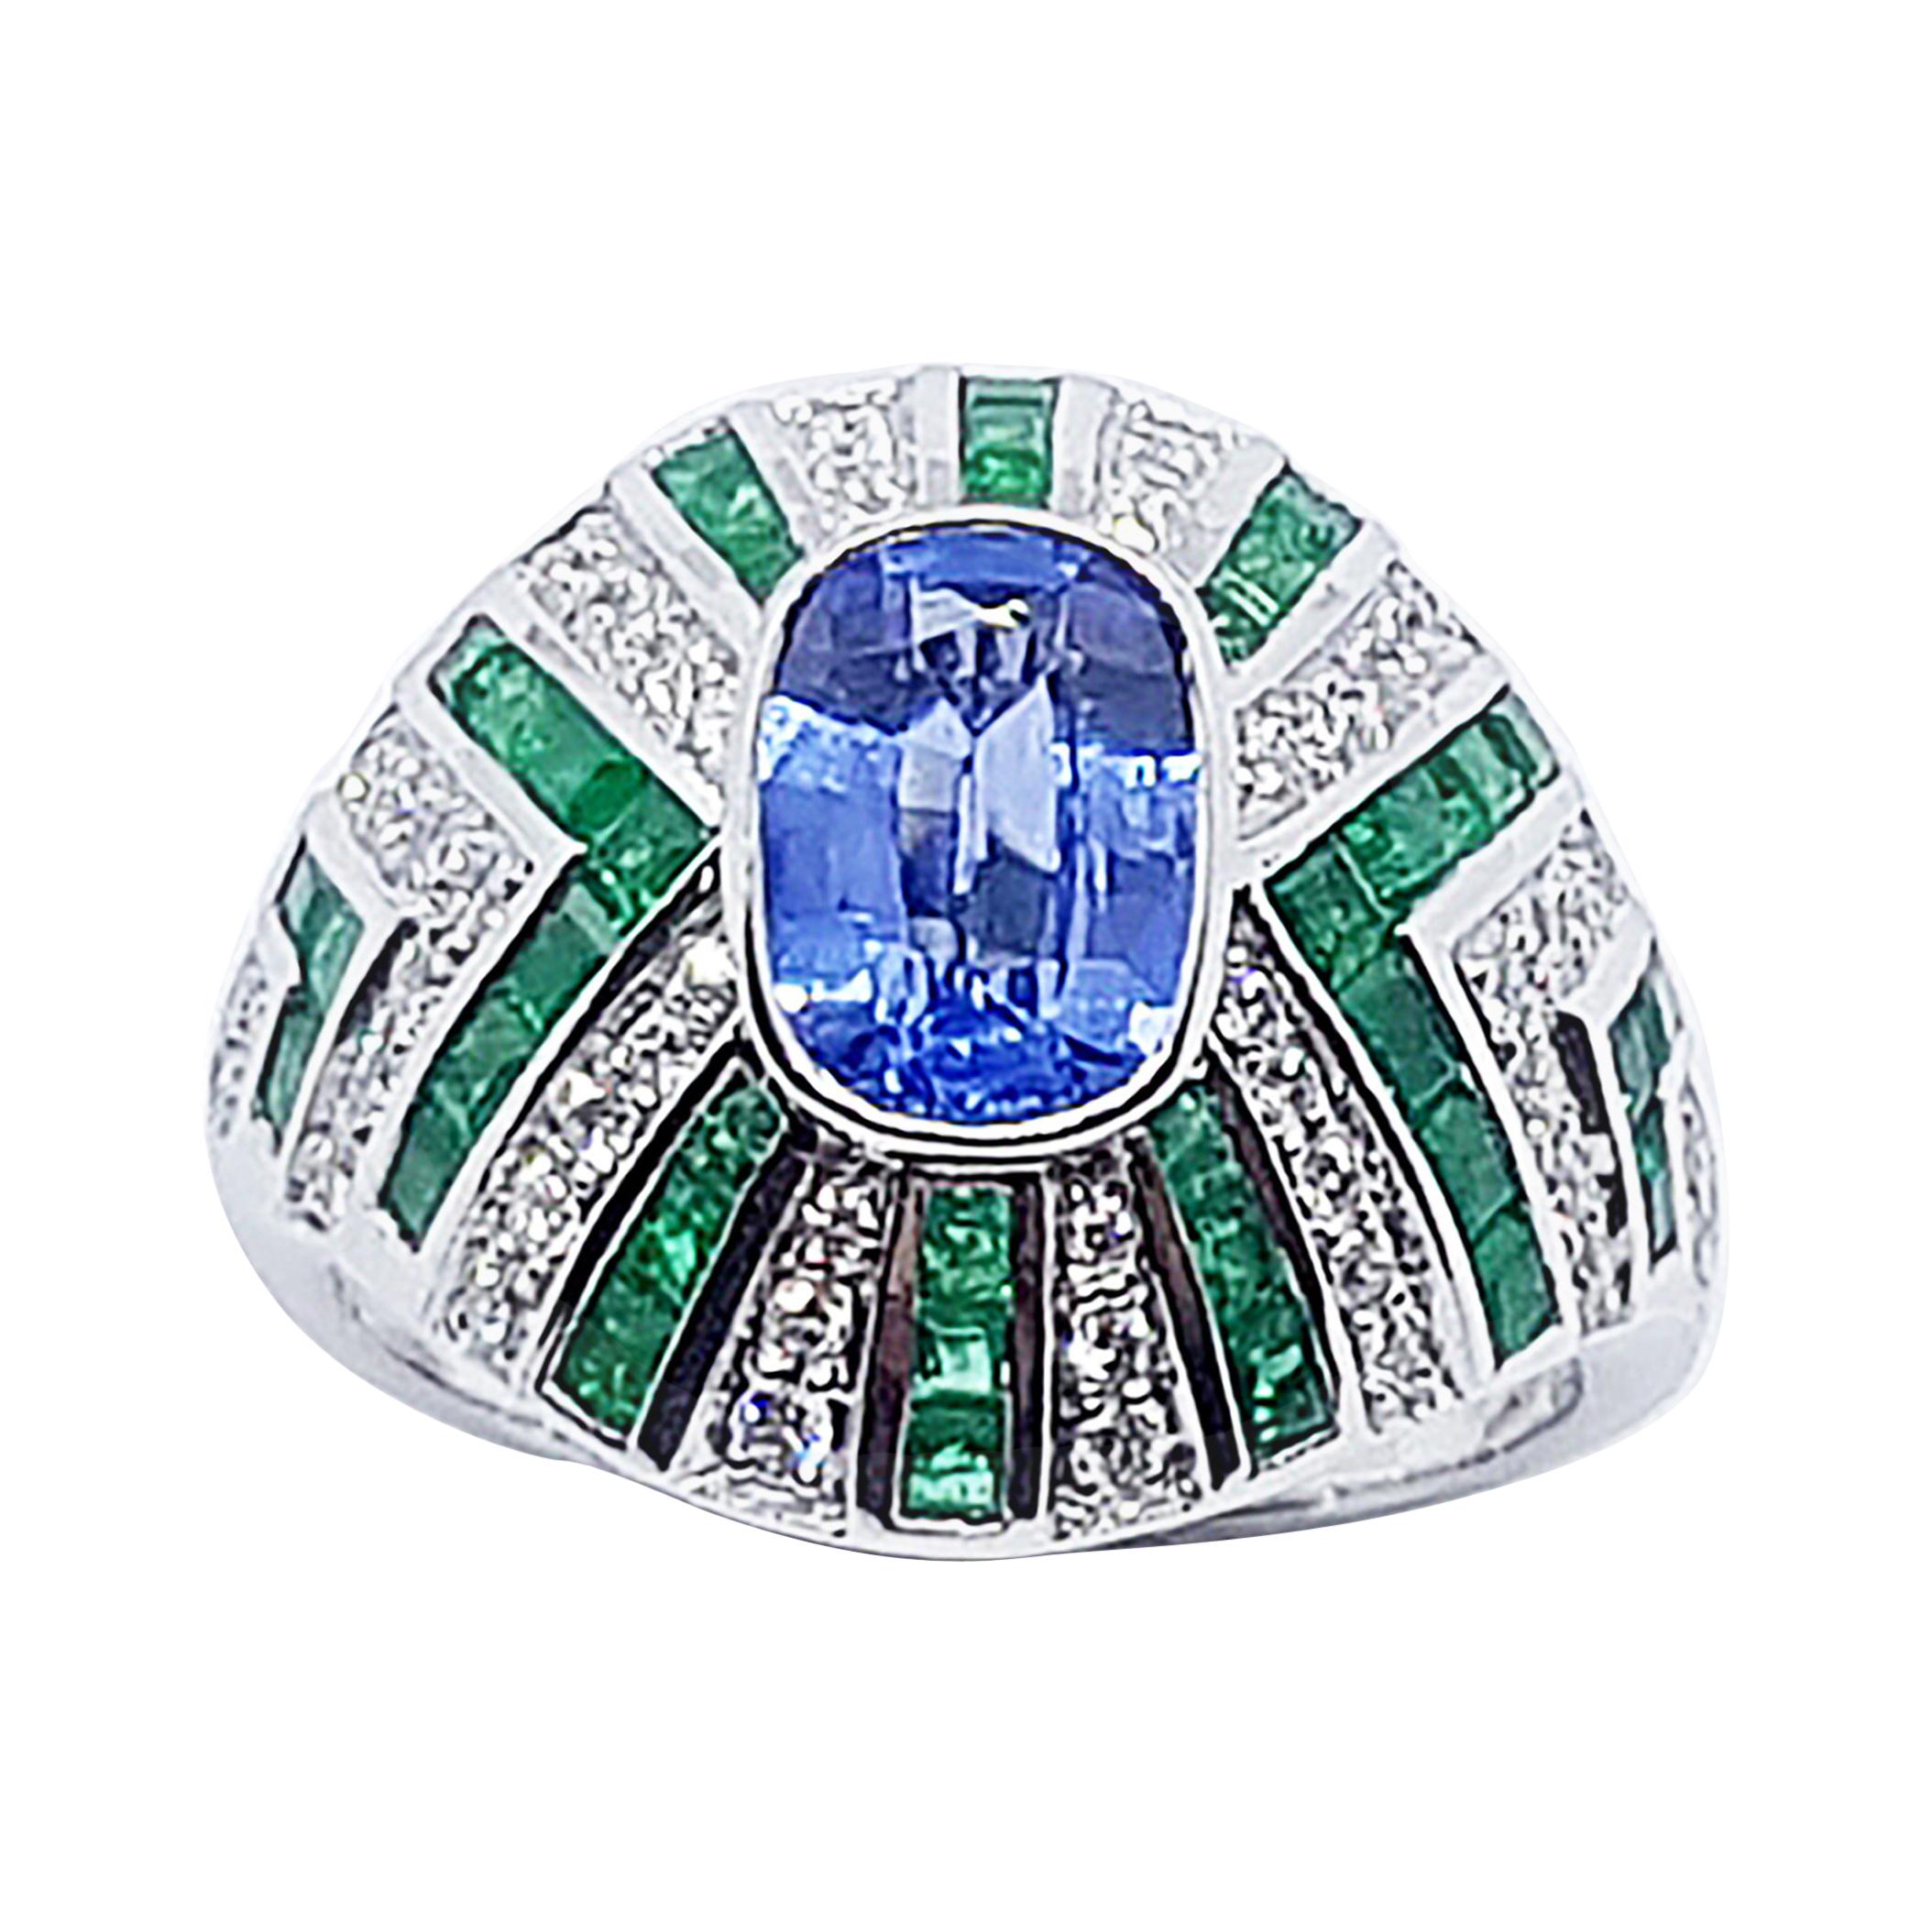 Blue Sapphire with Emerald and Diamond Ring Set in 18 Karat White Gold Settings